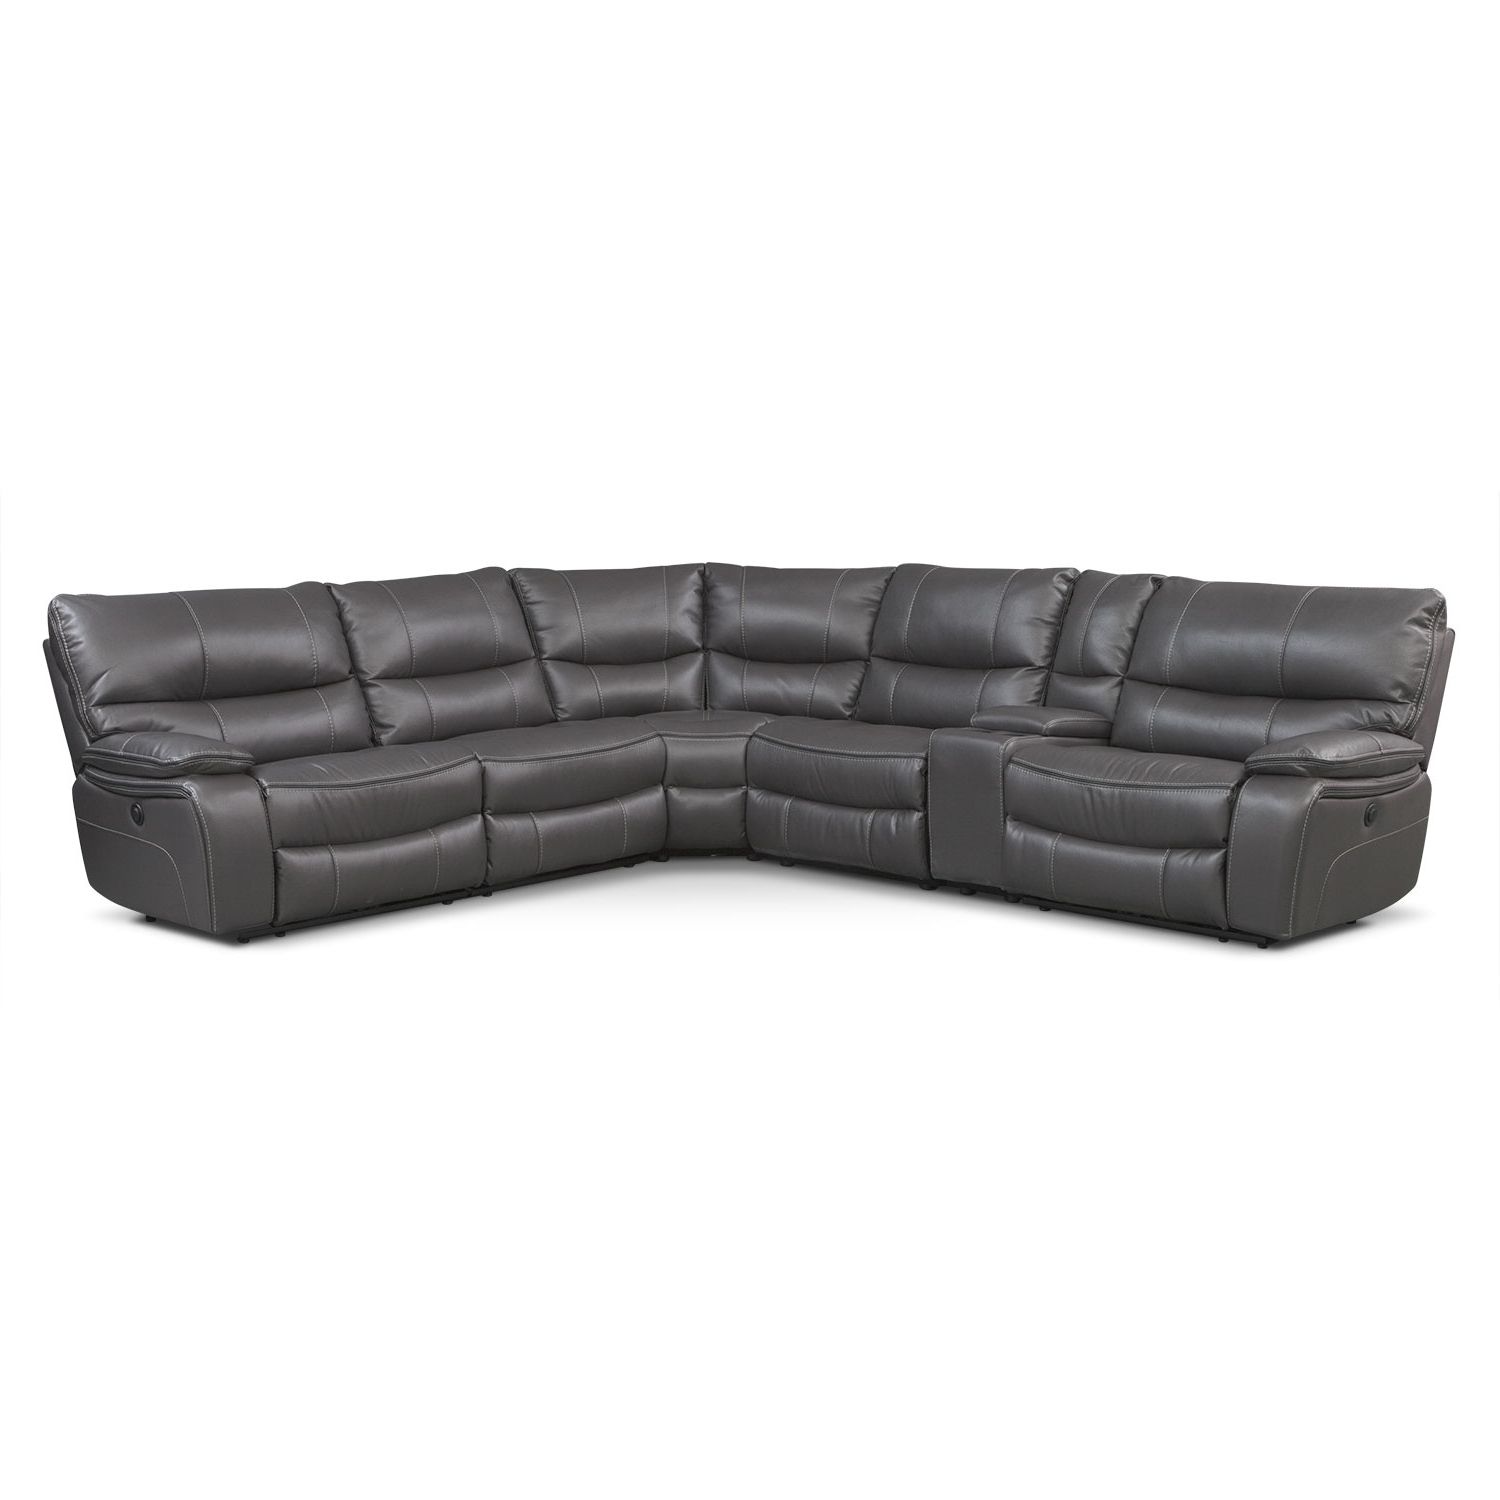 Most Recently Released Orlando 6 Piece Power Reclining Sectional With 1 Stationary Chair Throughout Orlando Sectional Sofas (View 4 of 15)